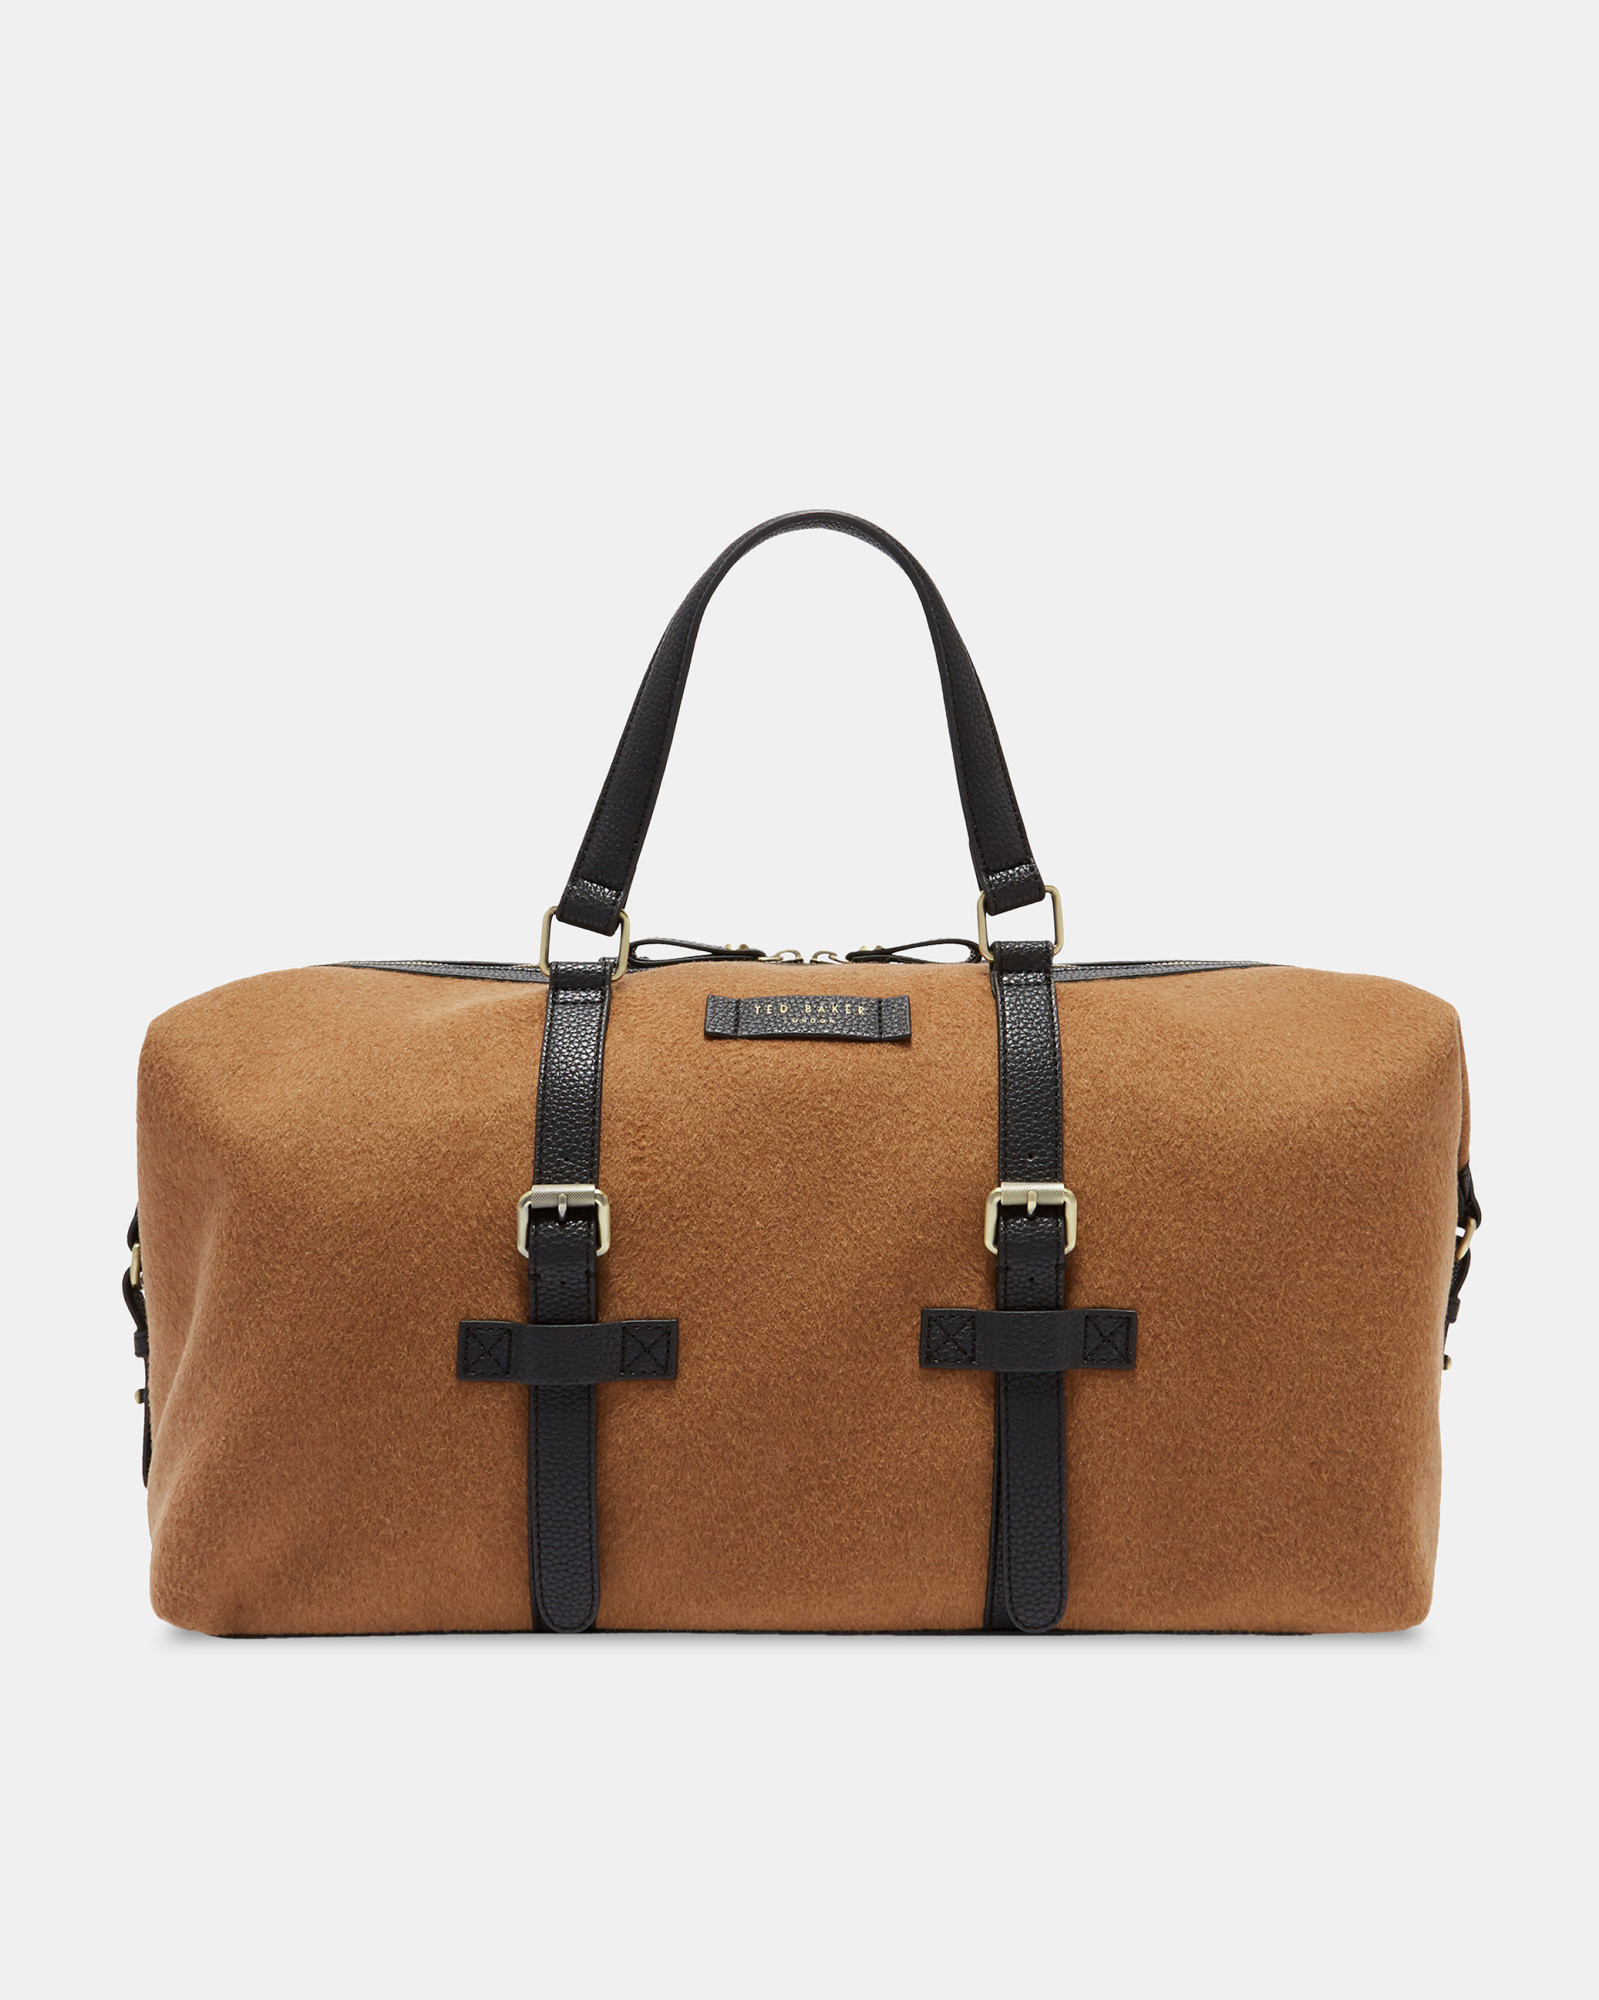 KNITTS Wool holdall